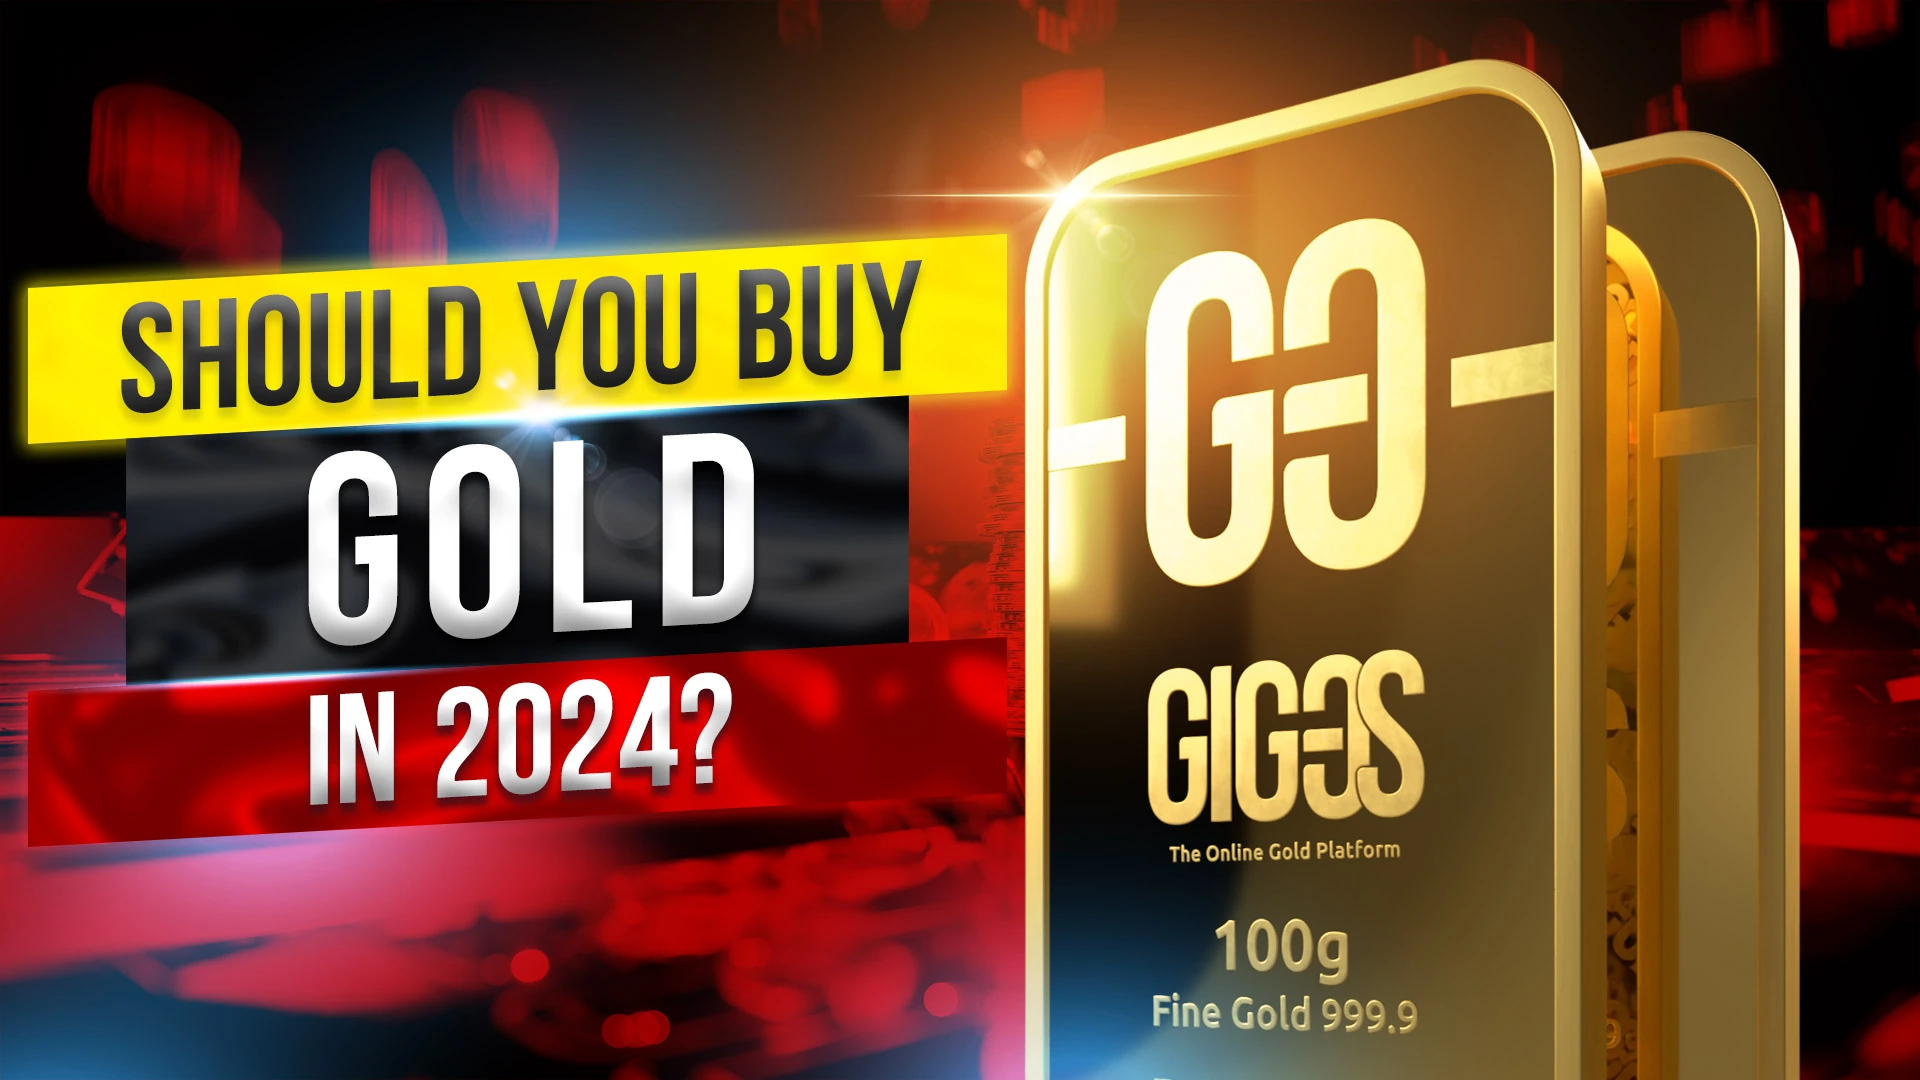 [VIDEO] Should you buy gold in 2024?